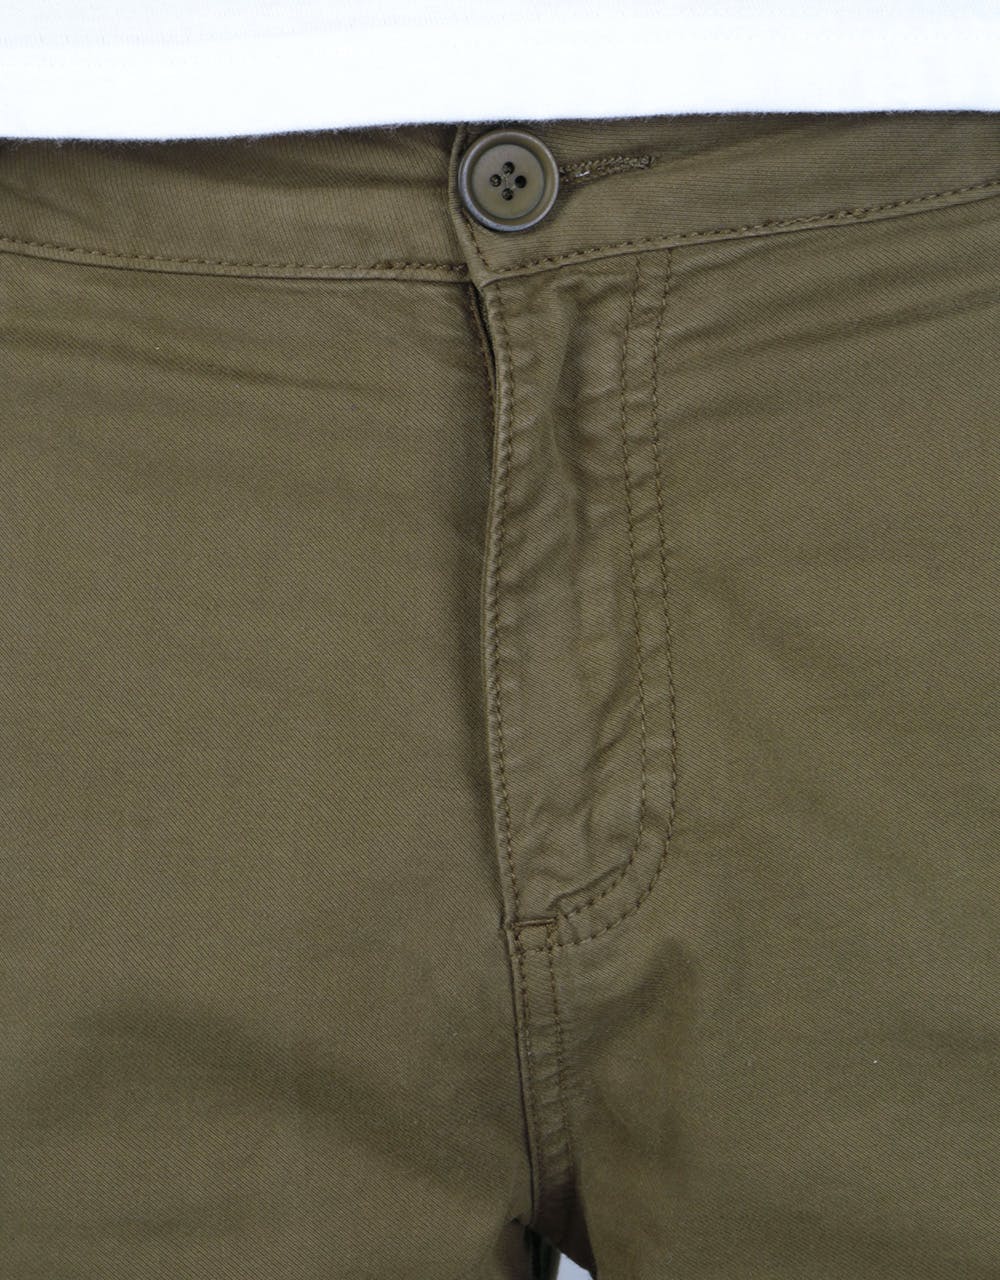 Route One Roll Up Chino Shorts - Olive